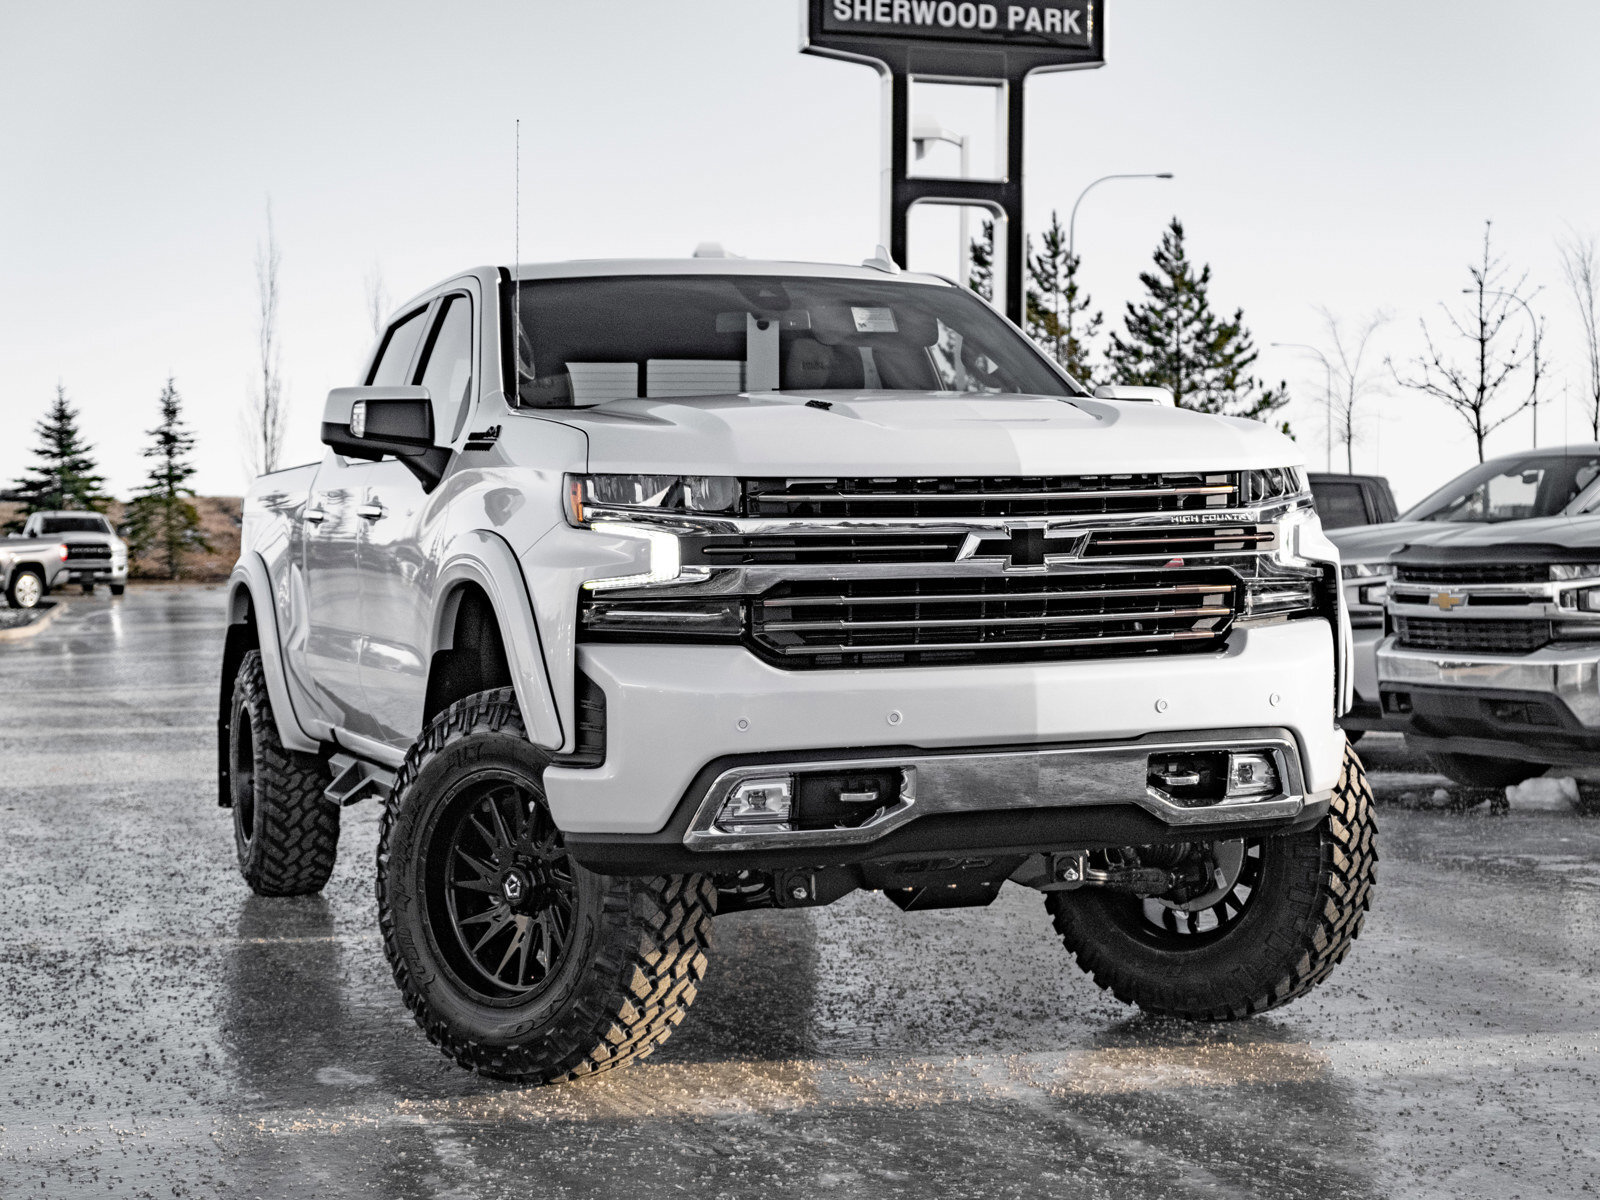 2022 Chevrolet Silverado 1500 LTD High Country High Country | 3.5in Lift Kit, 20in F